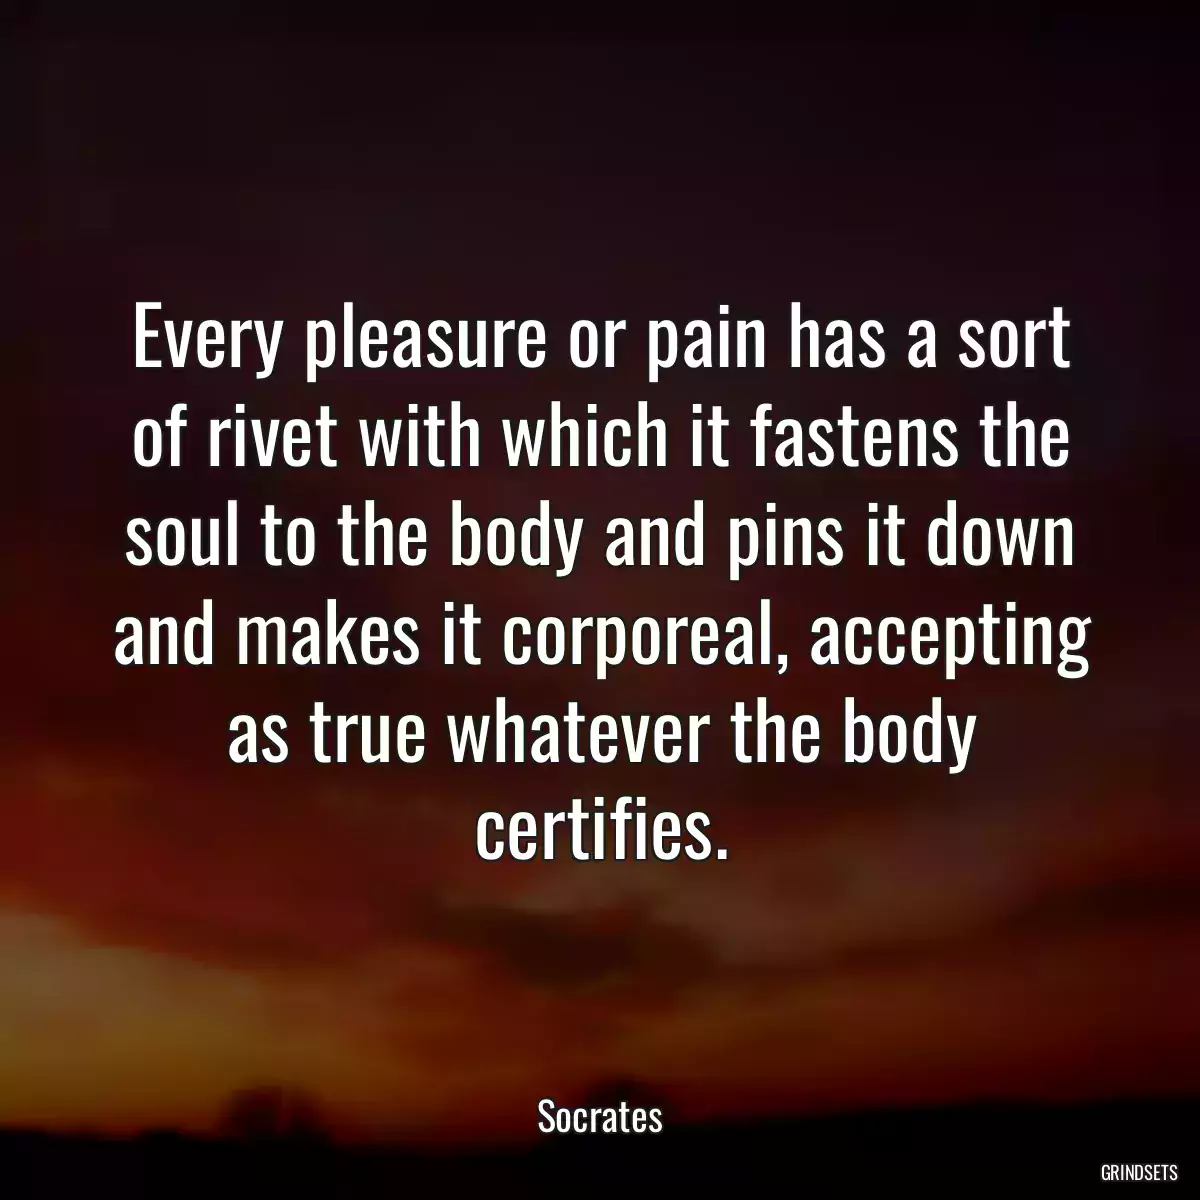 Every pleasure or pain has a sort of rivet with which it fastens the soul to the body and pins it down and makes it corporeal, accepting as true whatever the body certifies.